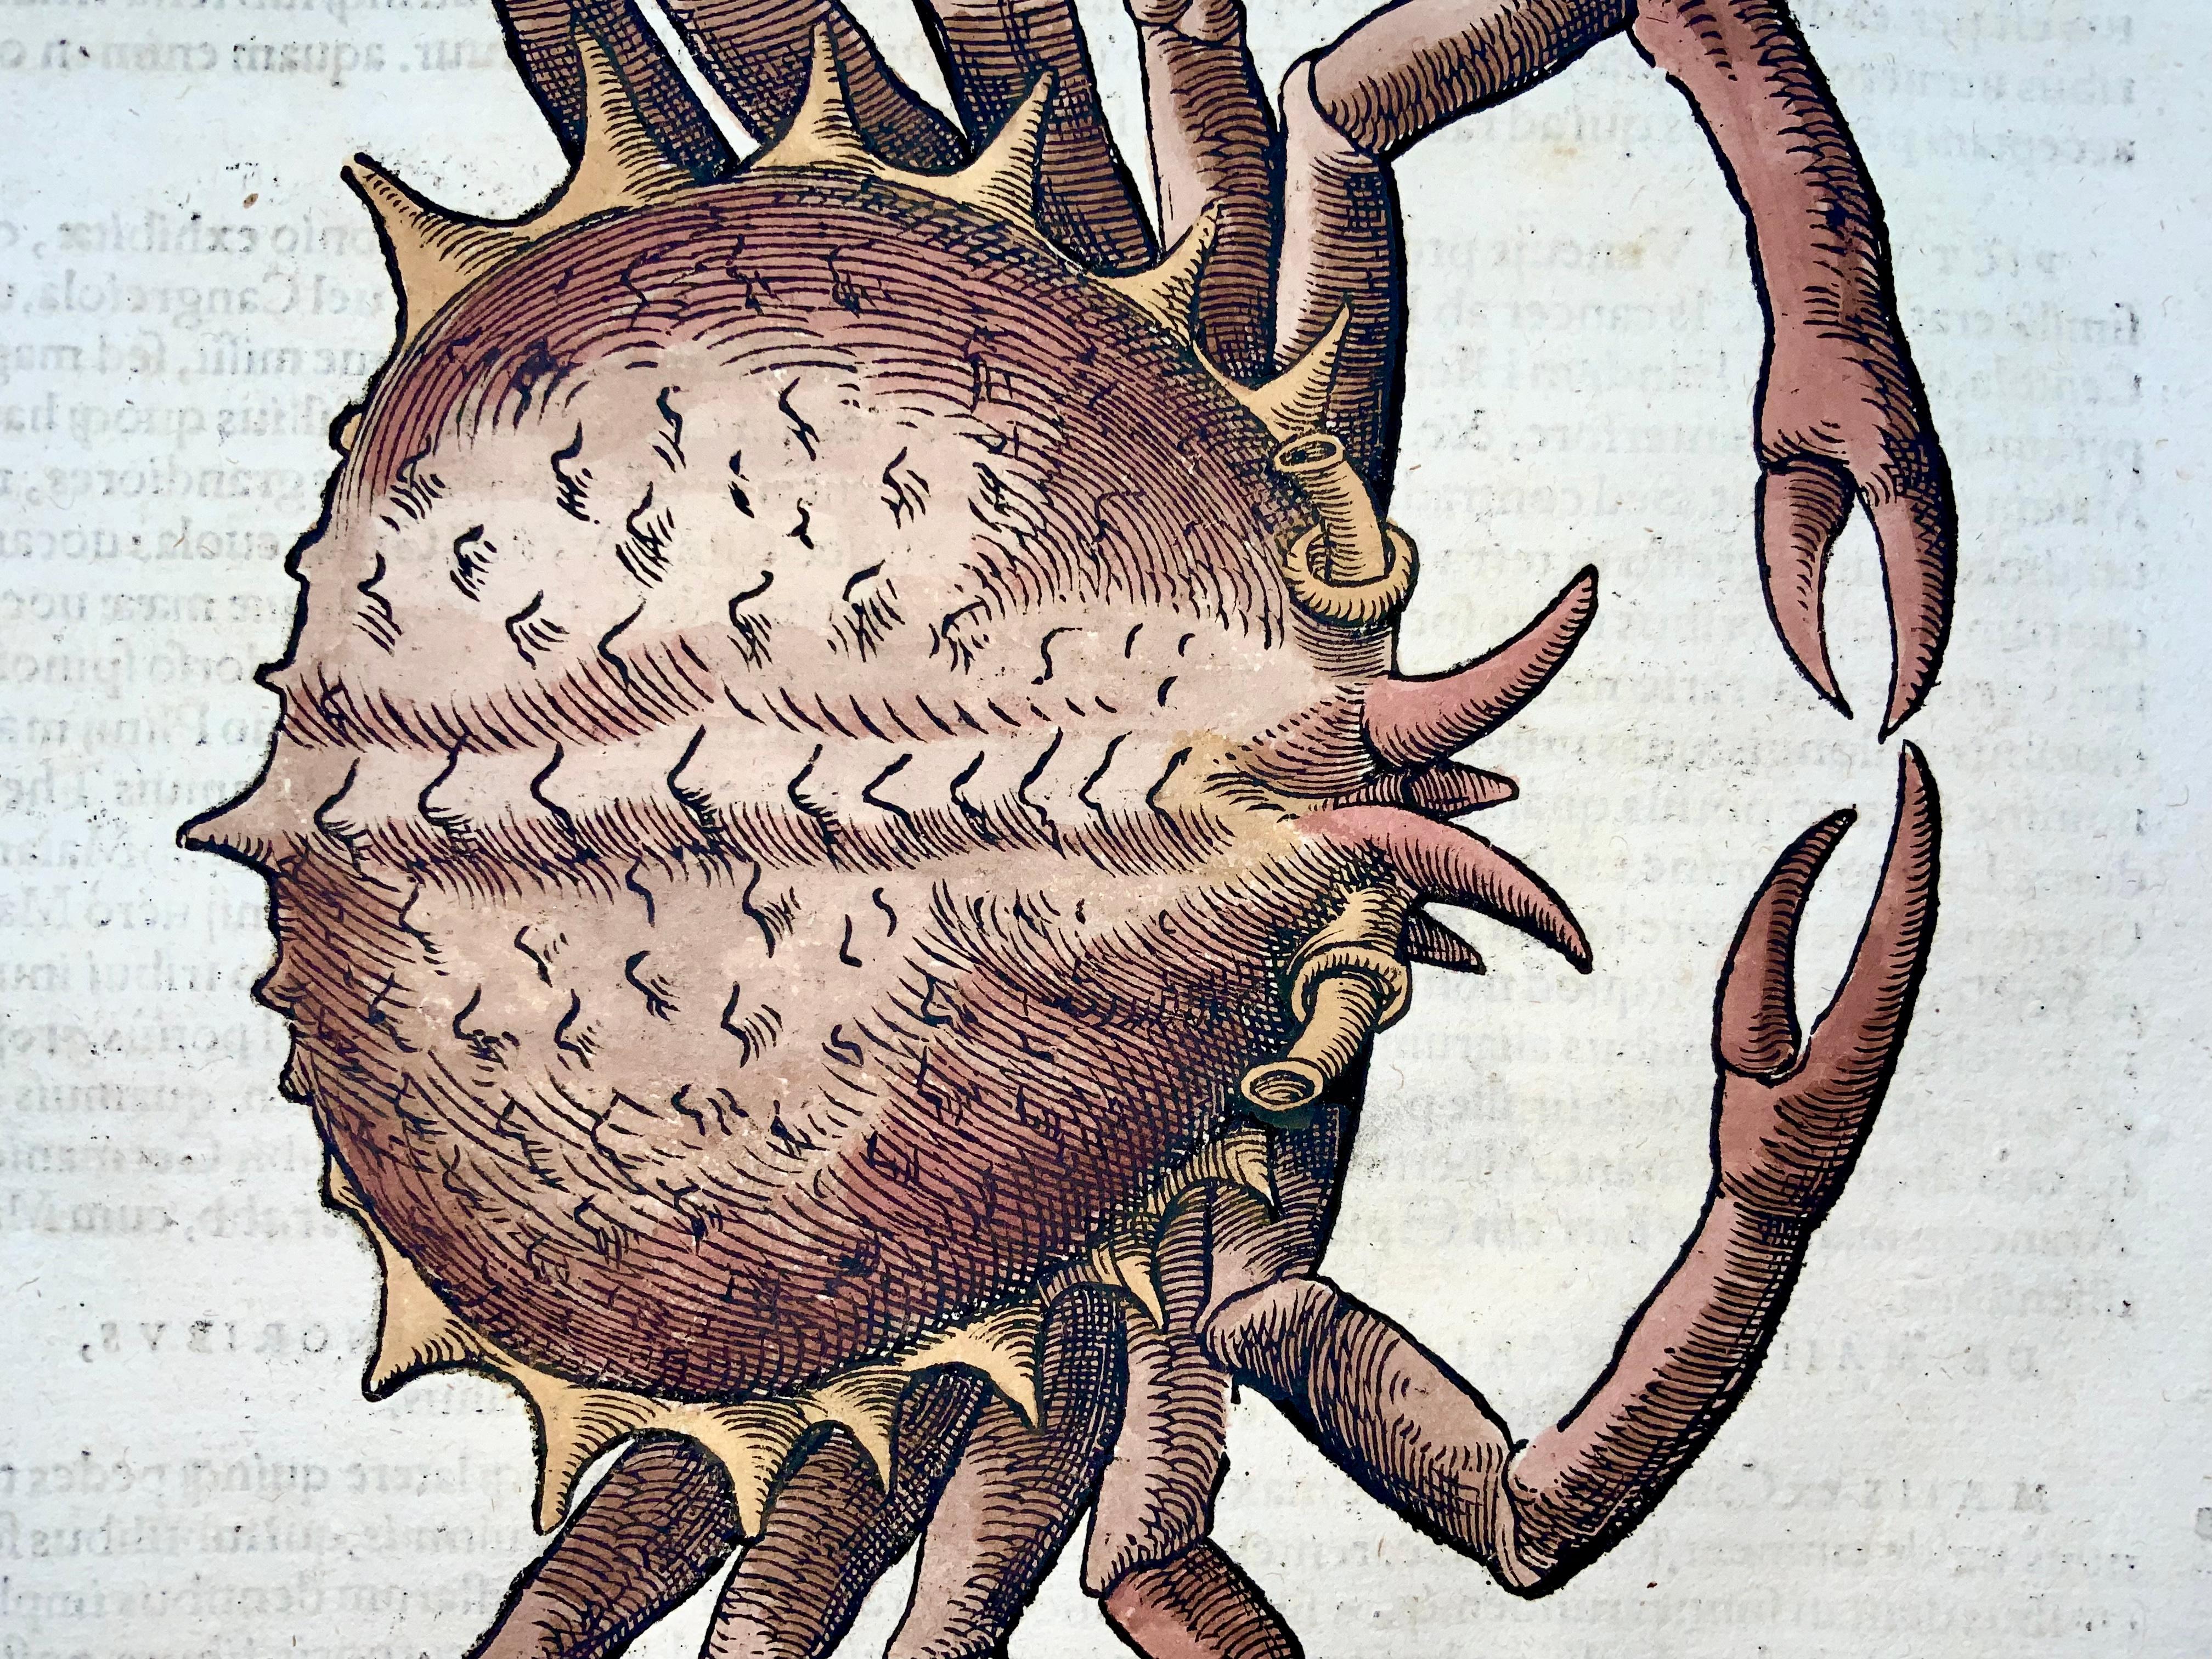 Etched 1558 Spider Crab, Conrad Gesner, Folio, Woodcut, Hand Coloured, First State For Sale